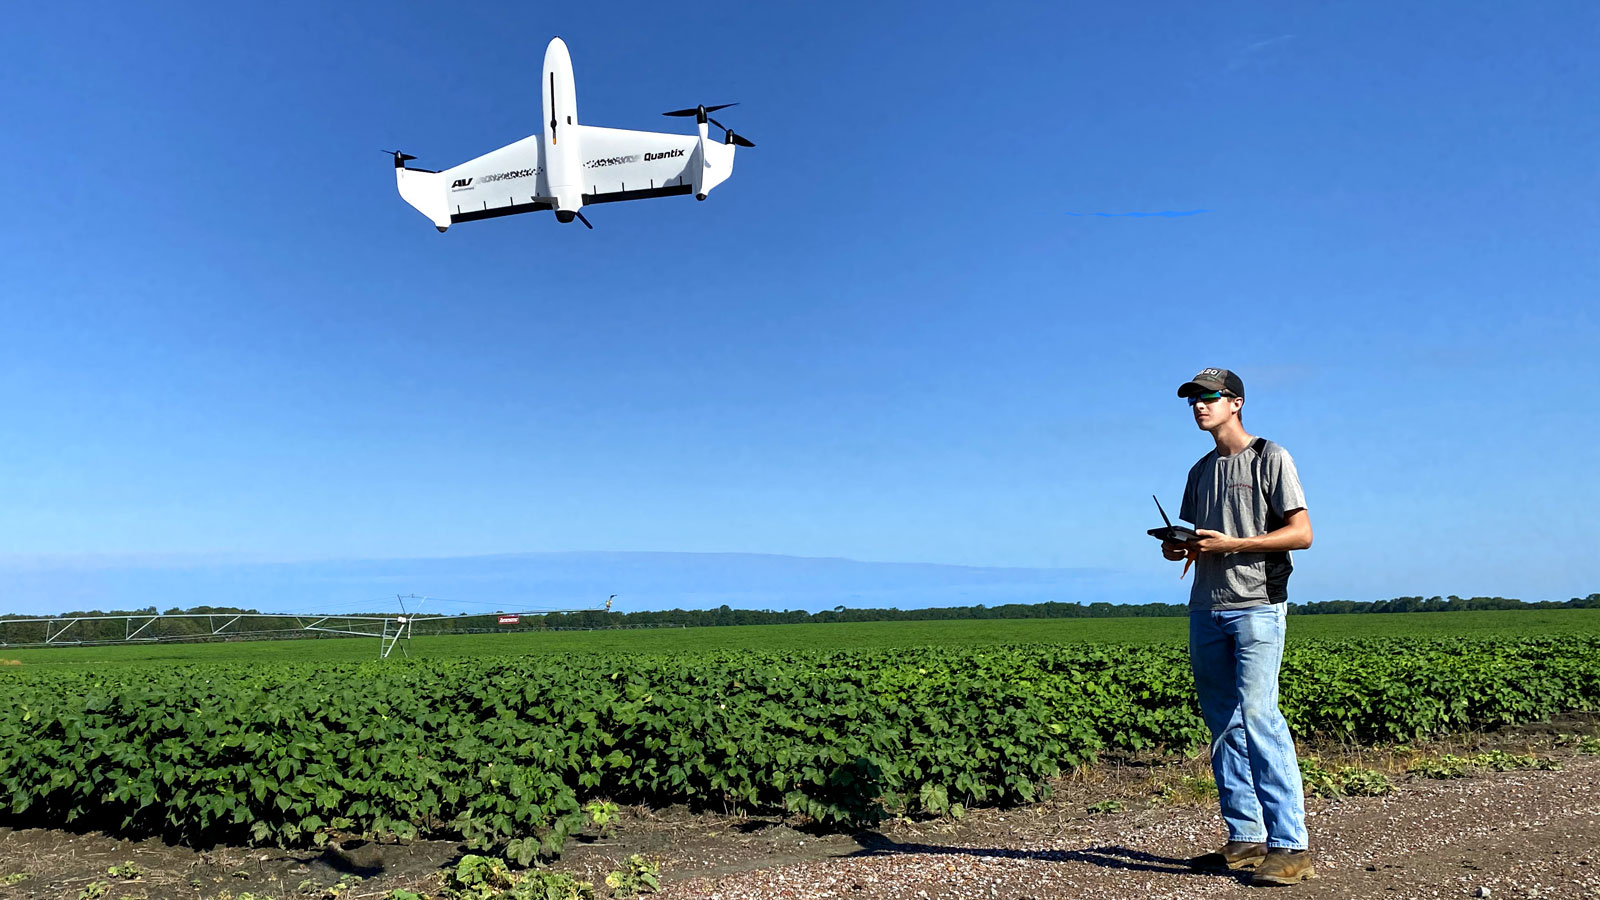 the Quantix Mapper drone flying over the cotton field